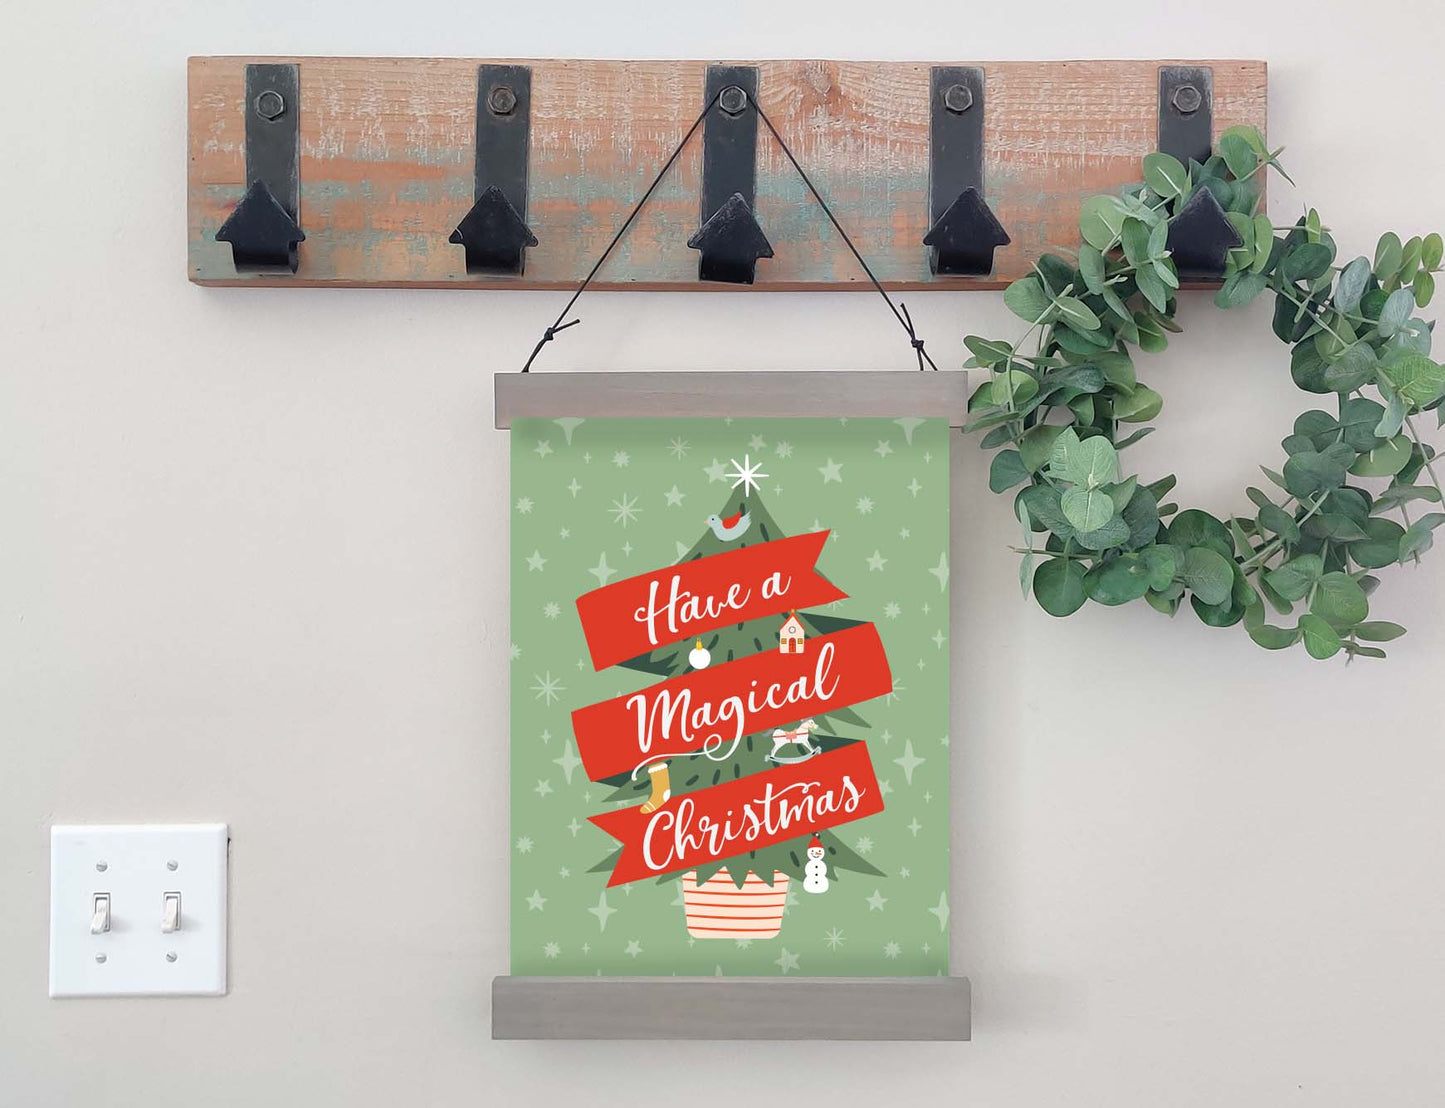 Magnetic Wall Hanging Insert: Have a Magical Christmas (Nutcracker Collection) | INSERT ONLY